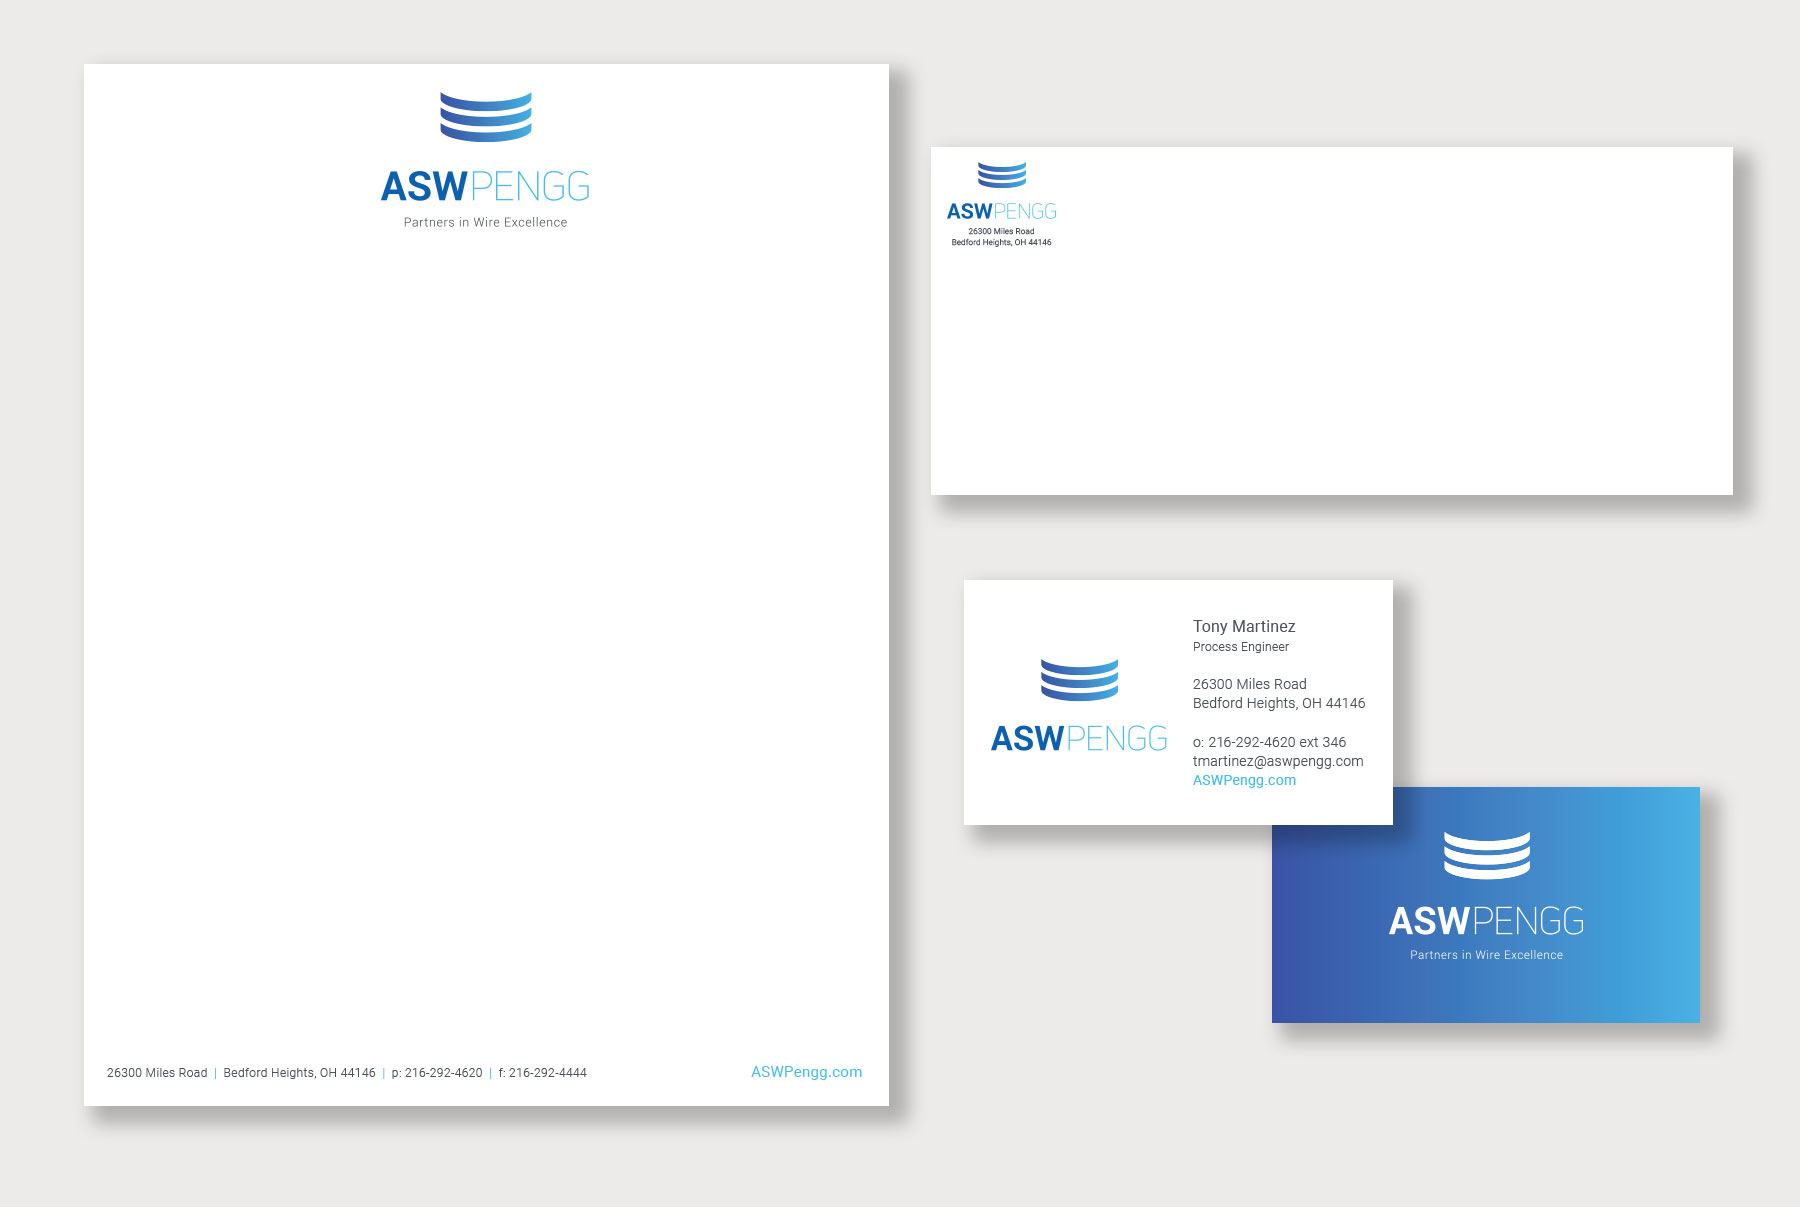 aswpengg stationery